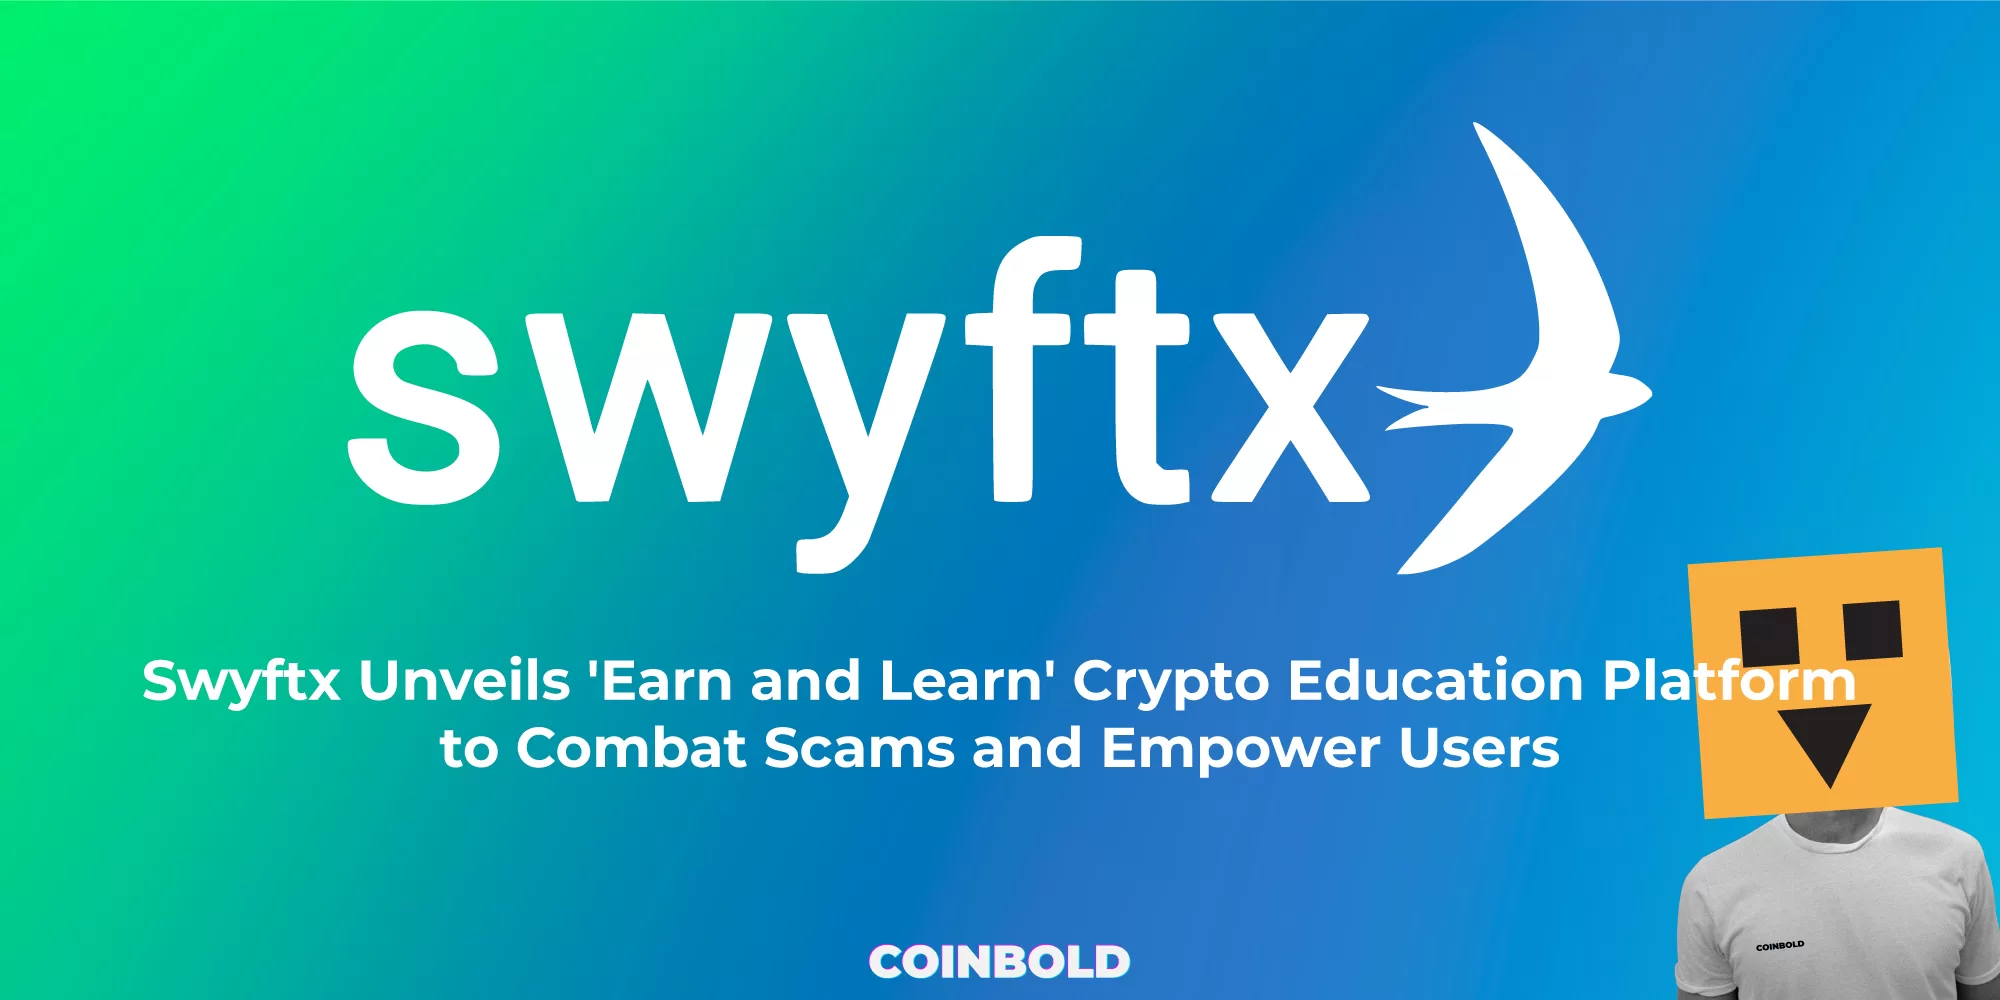 Swyftx Unveils 'Earn and Learn' Crypto Education Platform to Combat Scams and Empower Users